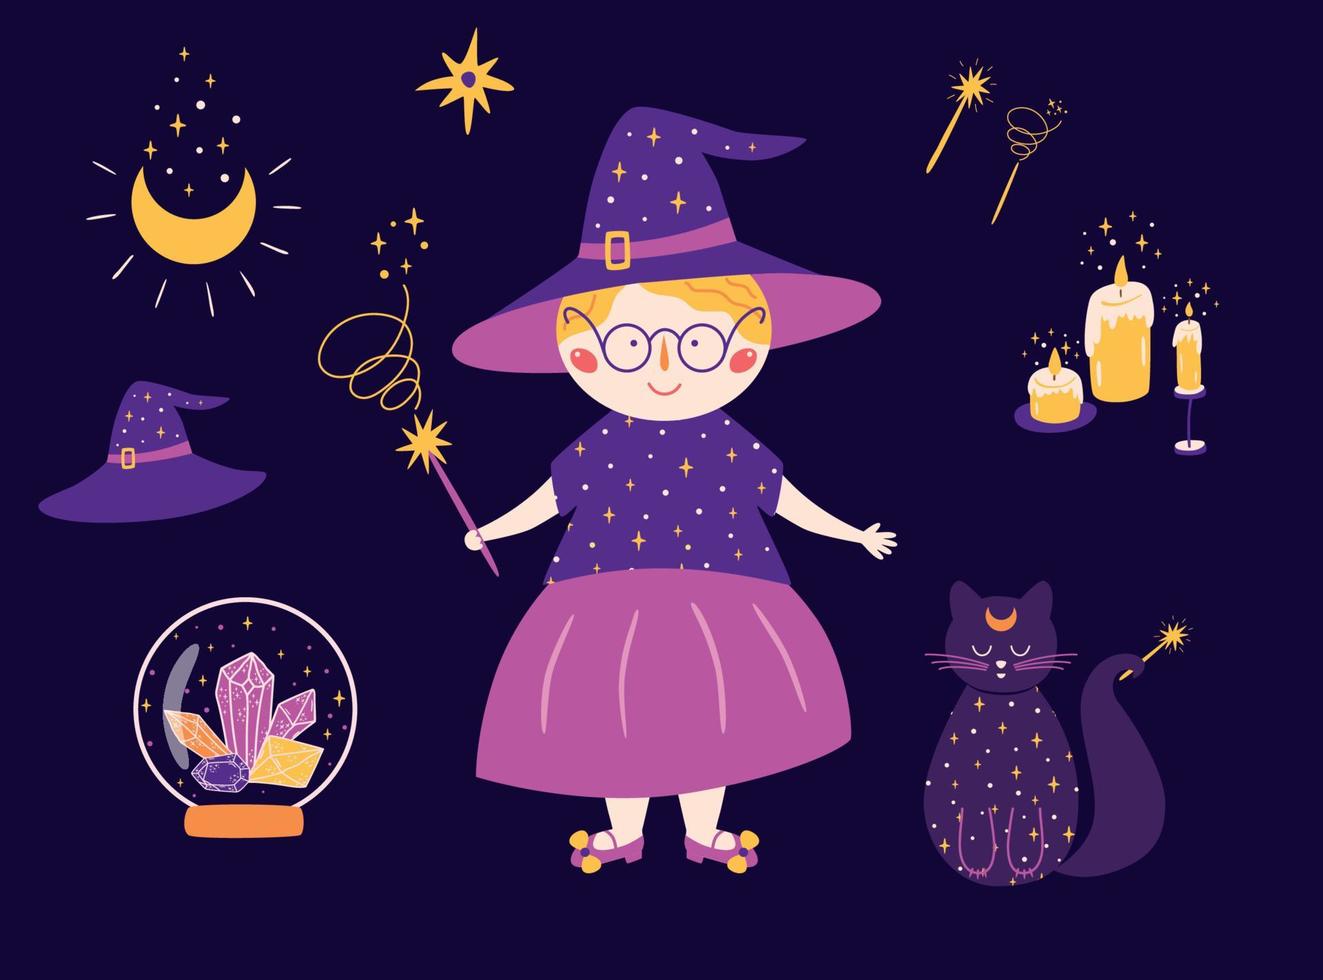 Magic set icon. Witch magic cat, crystals, hat, moon, wand, candles. Cute halloween element. Violet magical clip art Witchcraft isolated symbols. Hand drawn doodle sketch magician vector illustration.